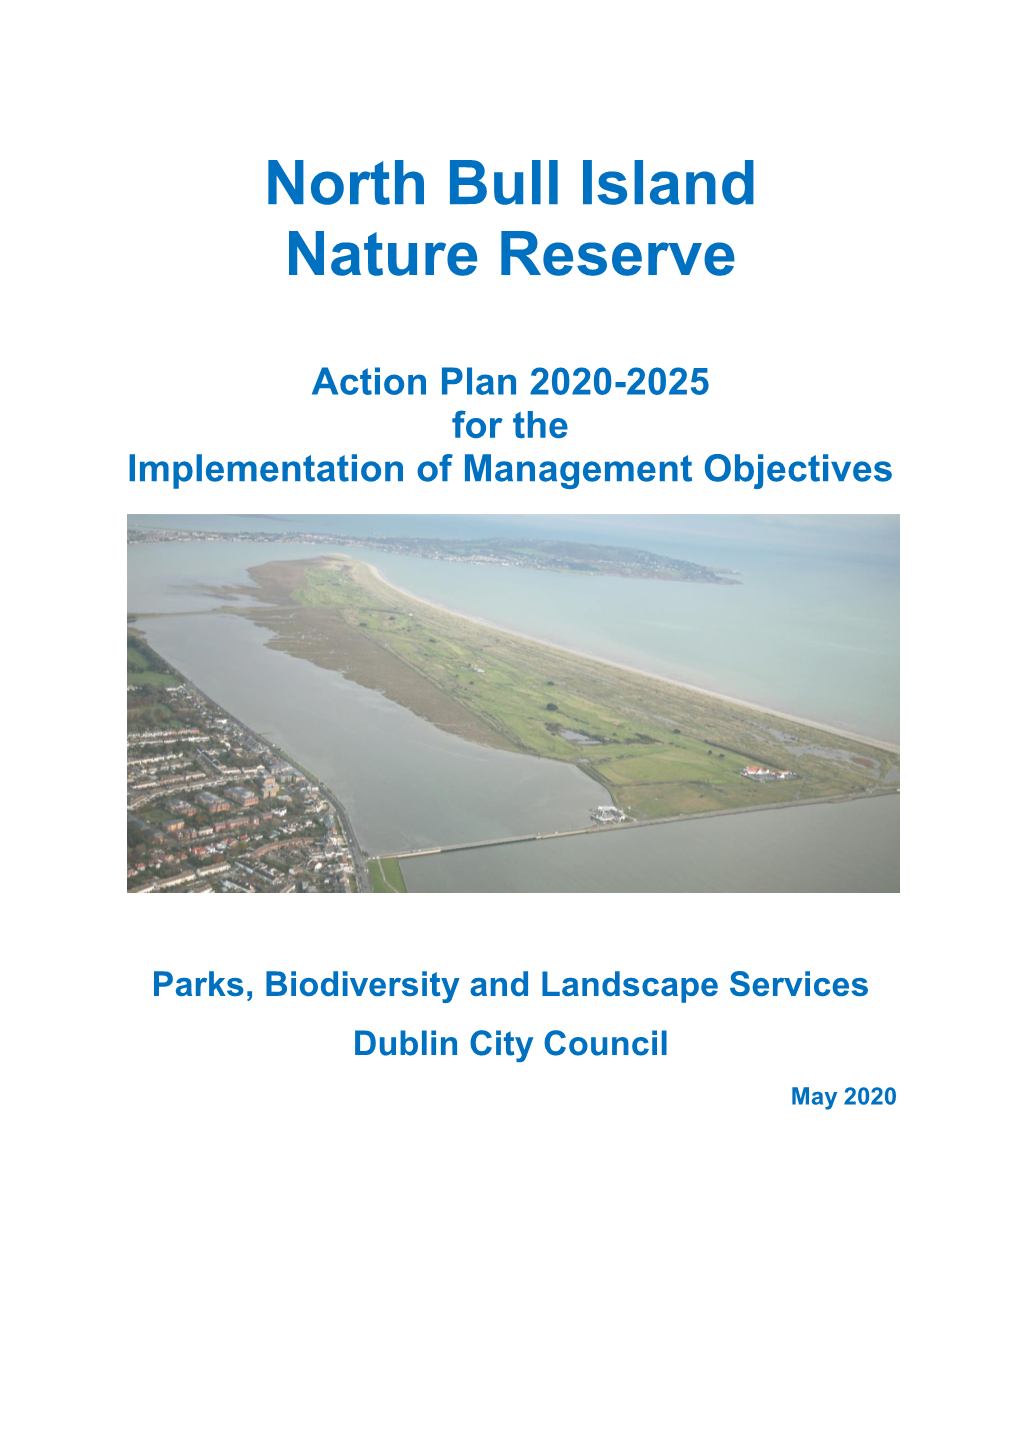 North Bull Island Nature Reserve Action Plan 2020